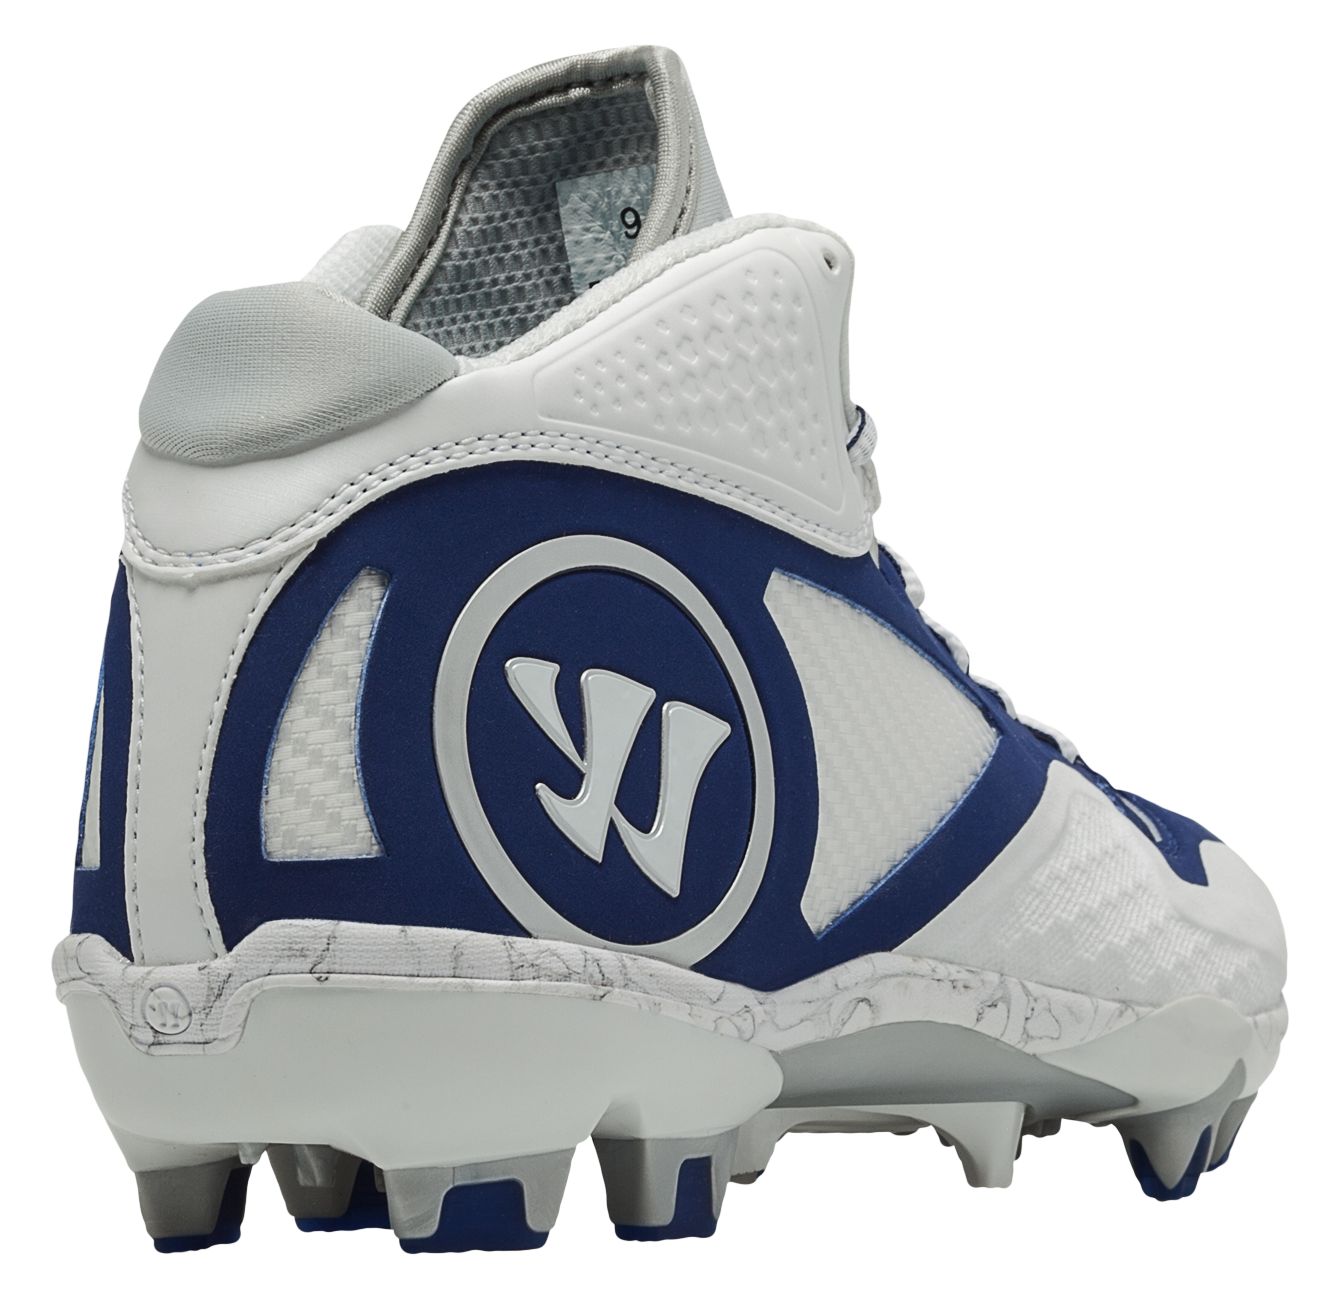 Adonis 2.0 Cleat, White with Blue image number 2